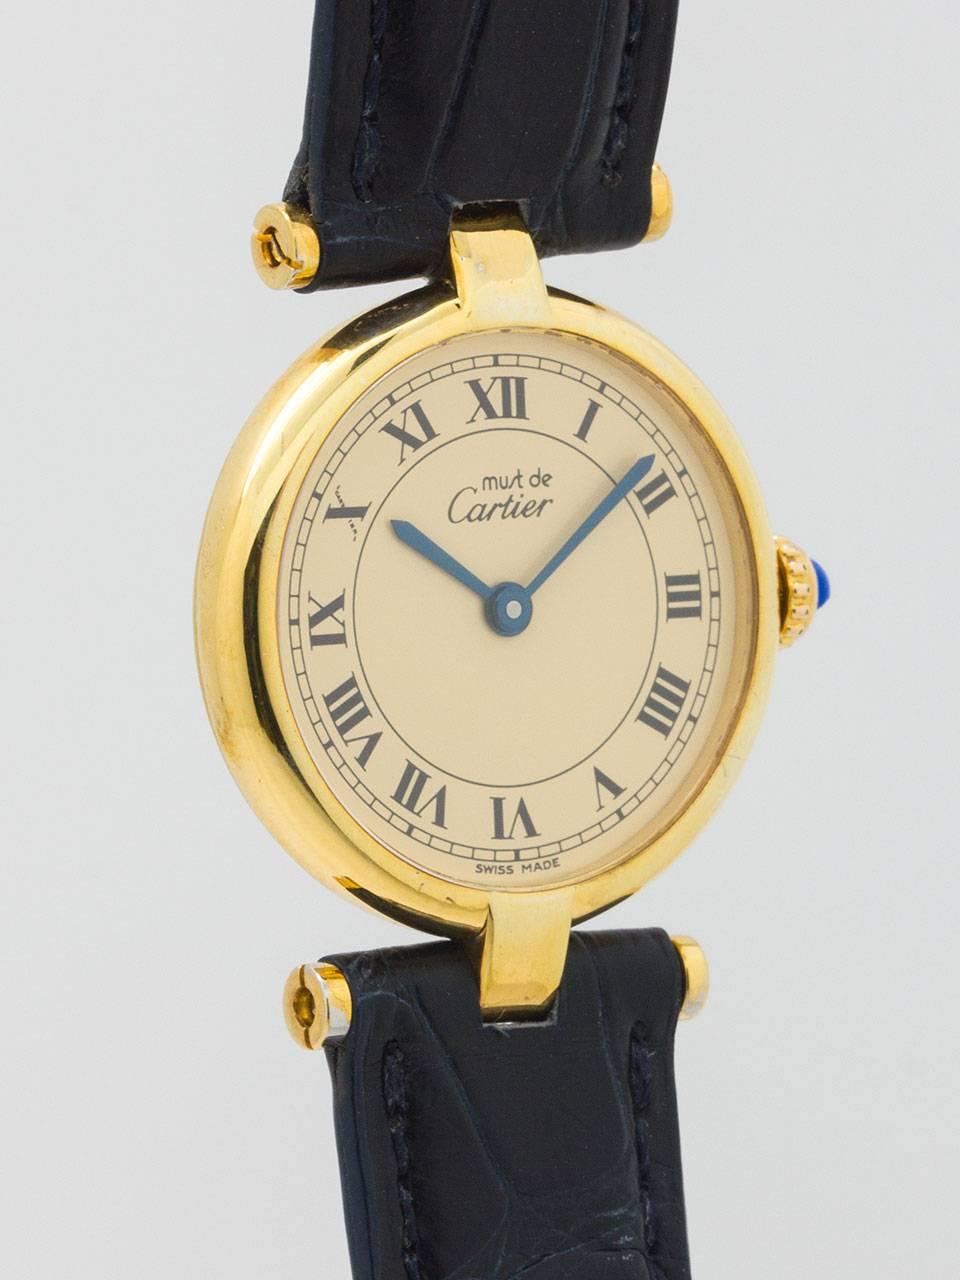 Cartier Lady’s Vermeil Vendome Tank Must de Cartier circa 1980s. 24.5 x 30mm round case with “T bar” lugs and acrylic crystal. Classic cream dial with black roman numerals, blue steeled hand, and blue cabochon sapphire crown. Battery powered quartz